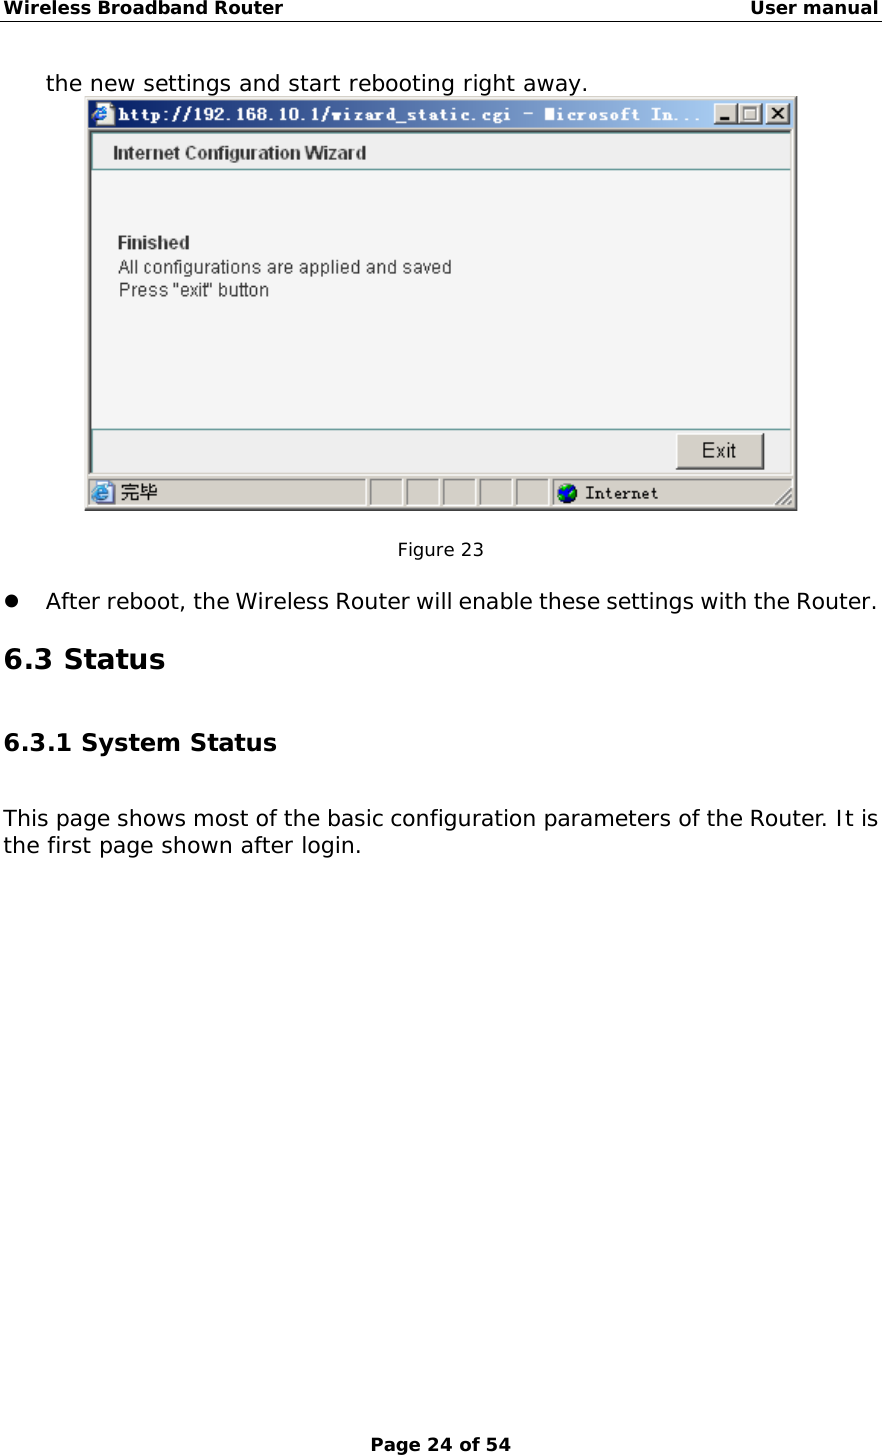 Wireless Broadband Router                                                   User manual Page 24 of 54 the new settings and start rebooting right away.   Figure 23  z After reboot, the Wireless Router will enable these settings with the Router.   6.3 Status  6.3.1 System Status This page shows most of the basic configuration parameters of the Router. It is the first page shown after login.  